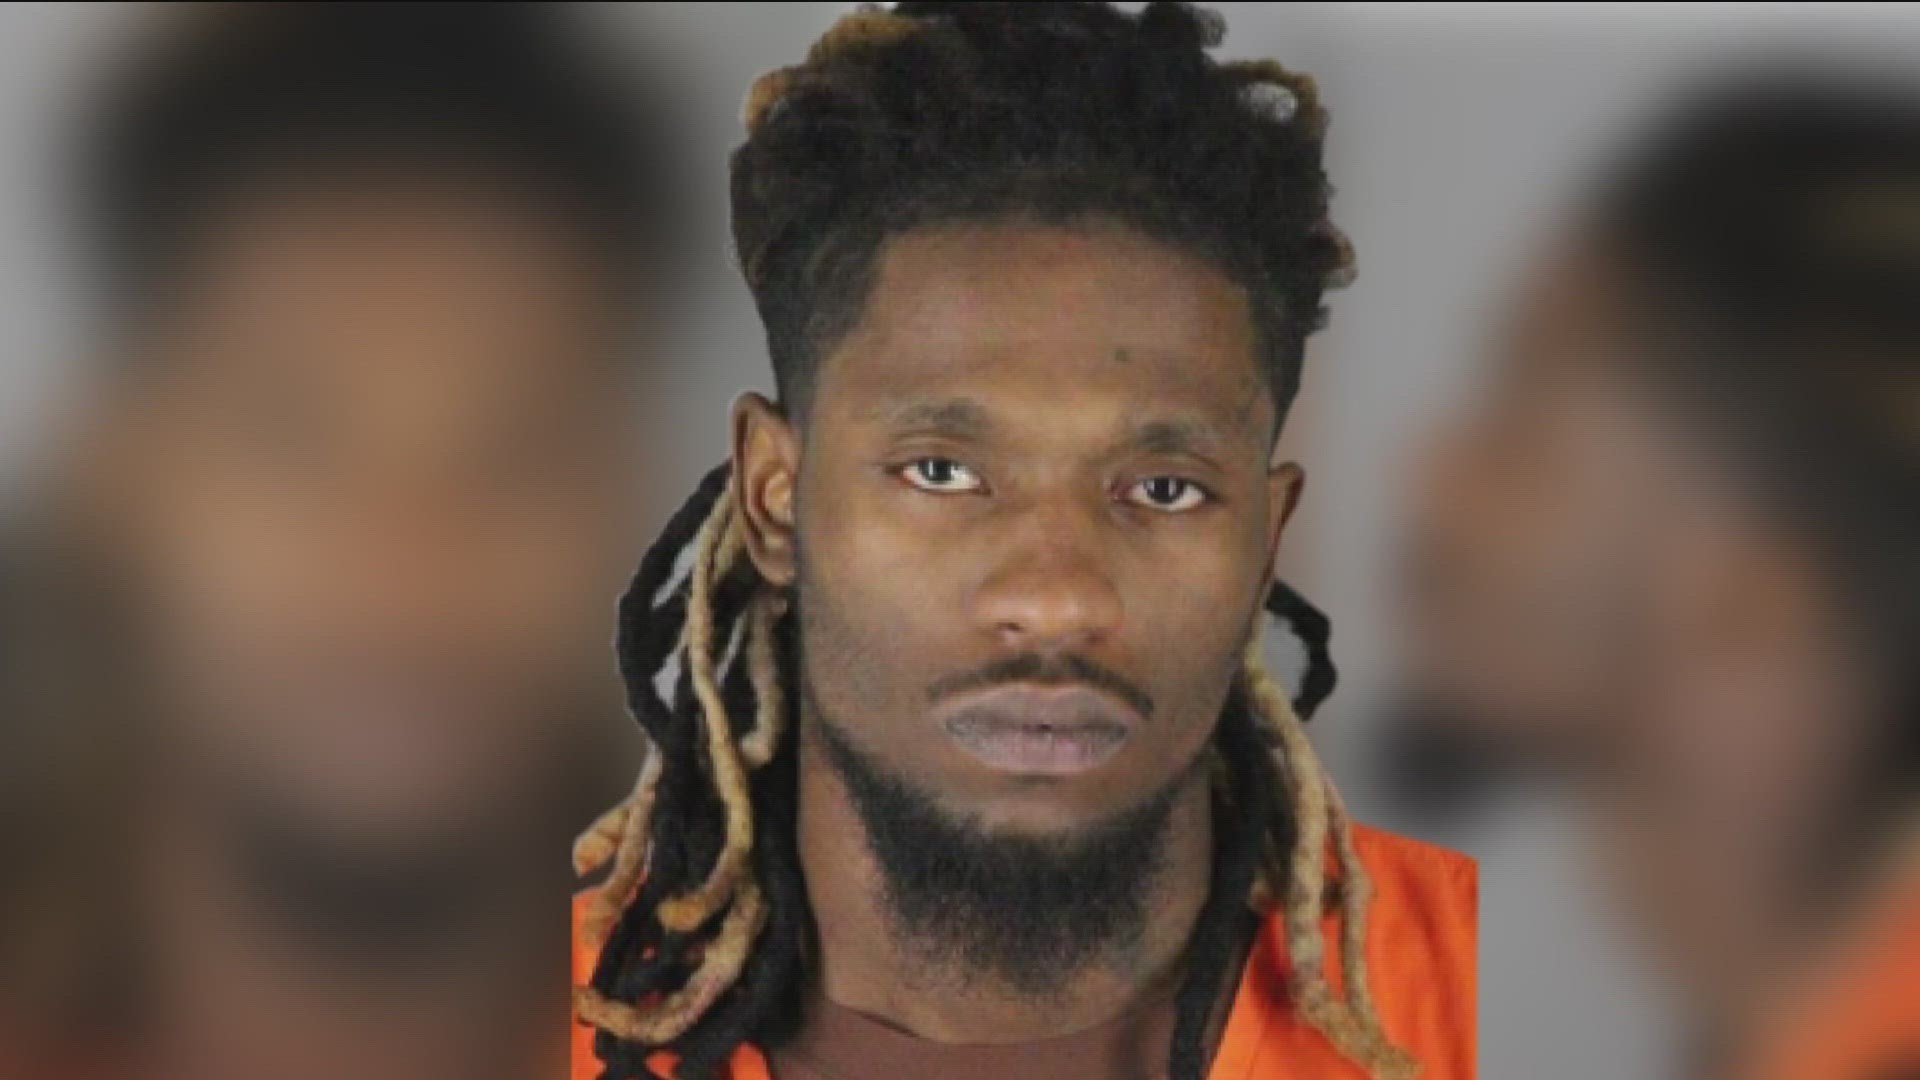 Prosecutors say Erick Haynes recruited Foday Kevin Kamara - then just 15 - and Kamara's brother to scare McKeever's new boyfriend. Instead, McKeever was killed.